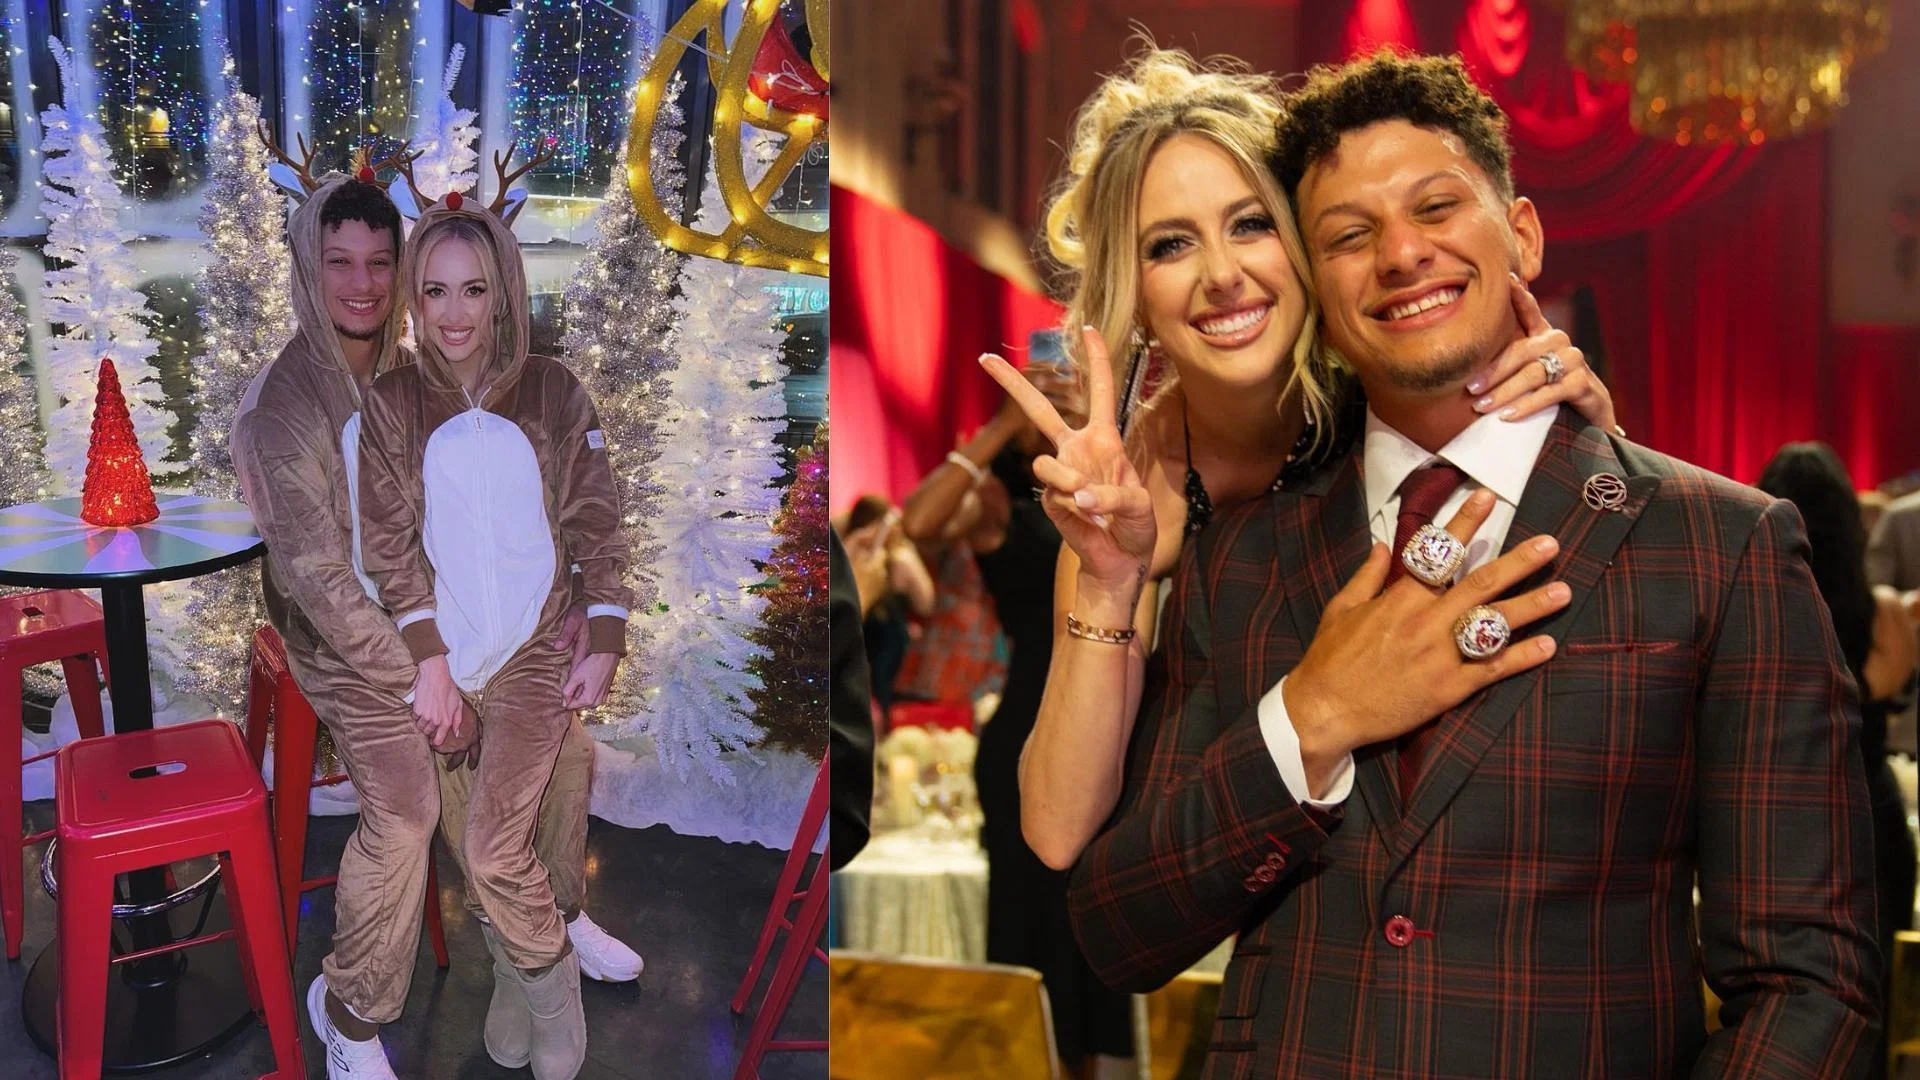 IN PHOTOS: Patrick Mahomes and Brittany Dress up for Christmas Preparations Ahead of Chiefs vs Packers